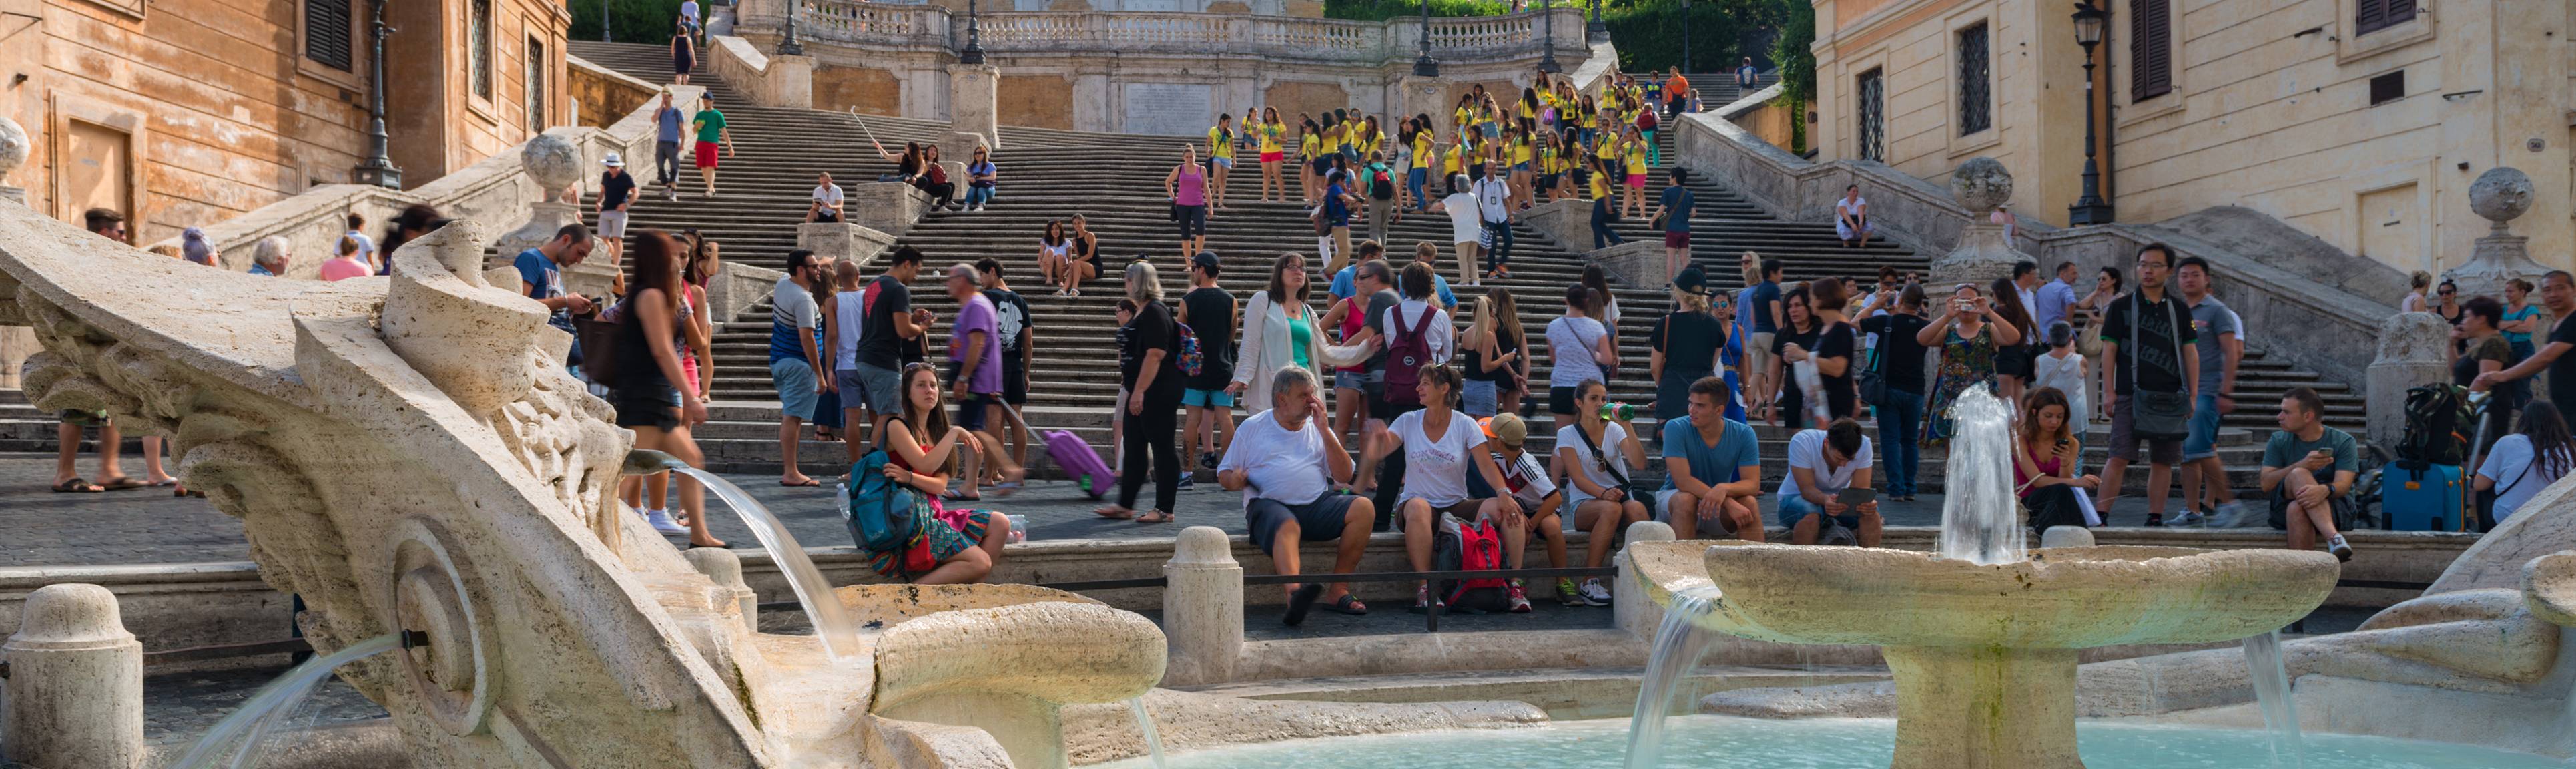 Visitors resting on the The Spanish Steps in Rome